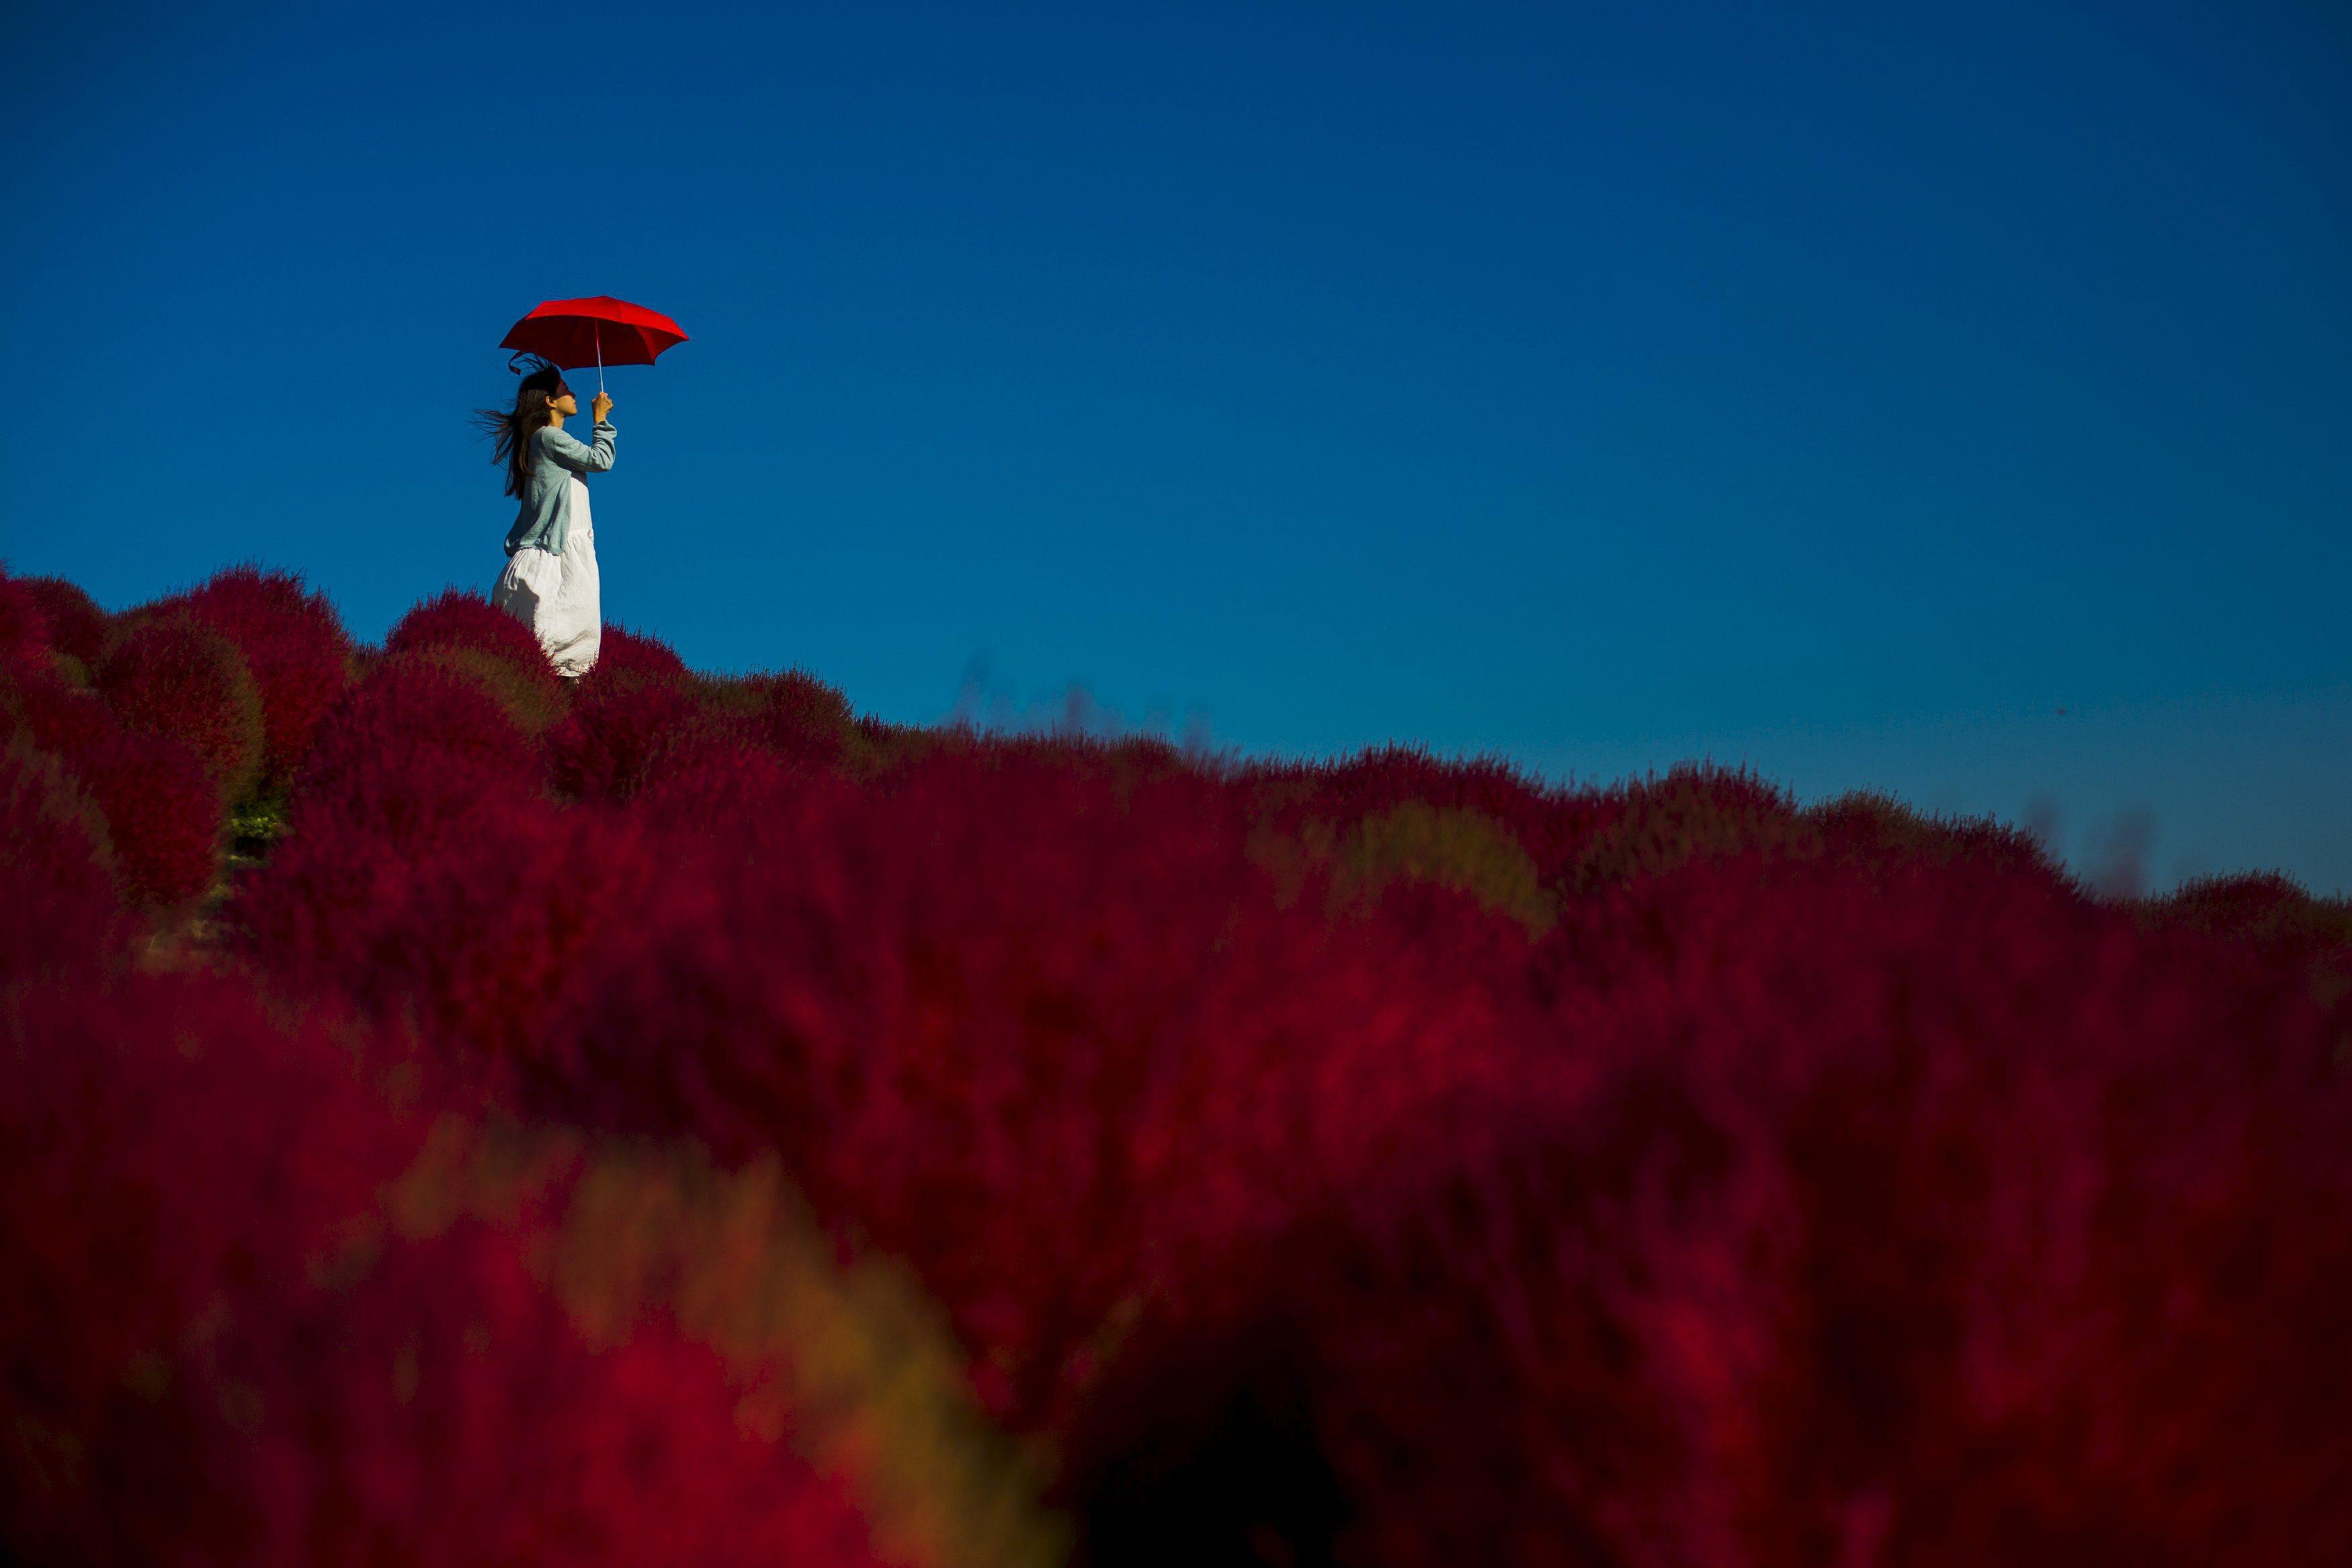 A woman holds a parasol as she stands in a field of fireweed at the Hitachi Seaside Park north of To